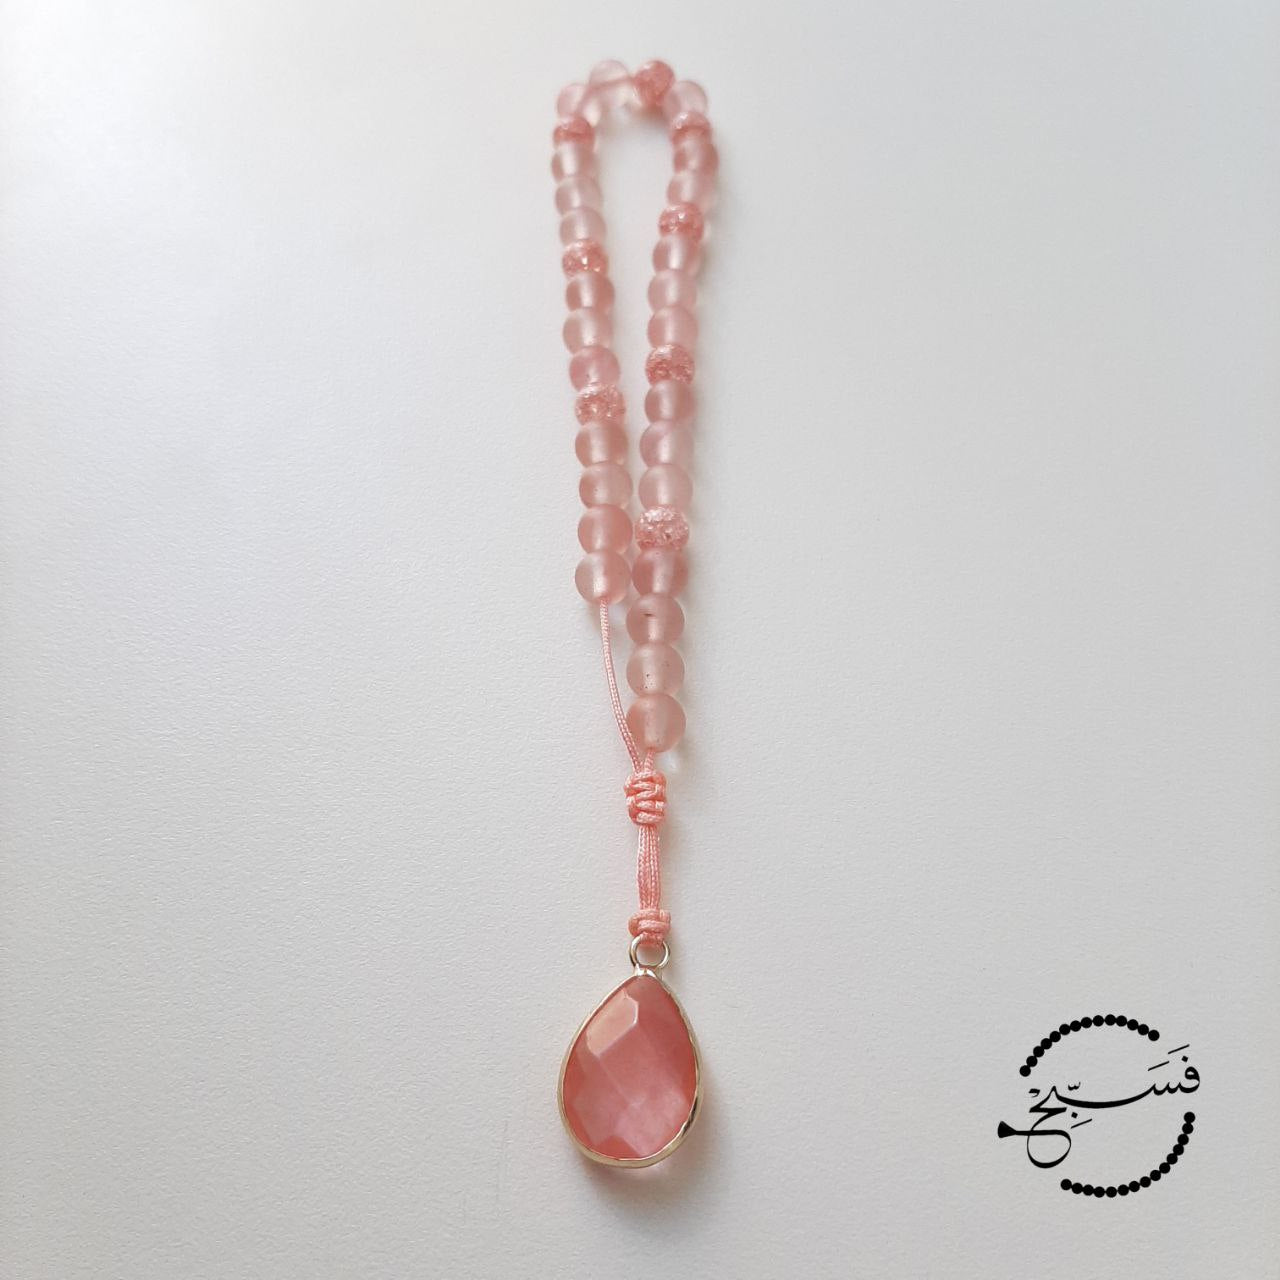 Watermelon quartz and crystal beads, with a watermelon quartz pendant.  Features an adjustable knot.  33 beads (6mm beads)